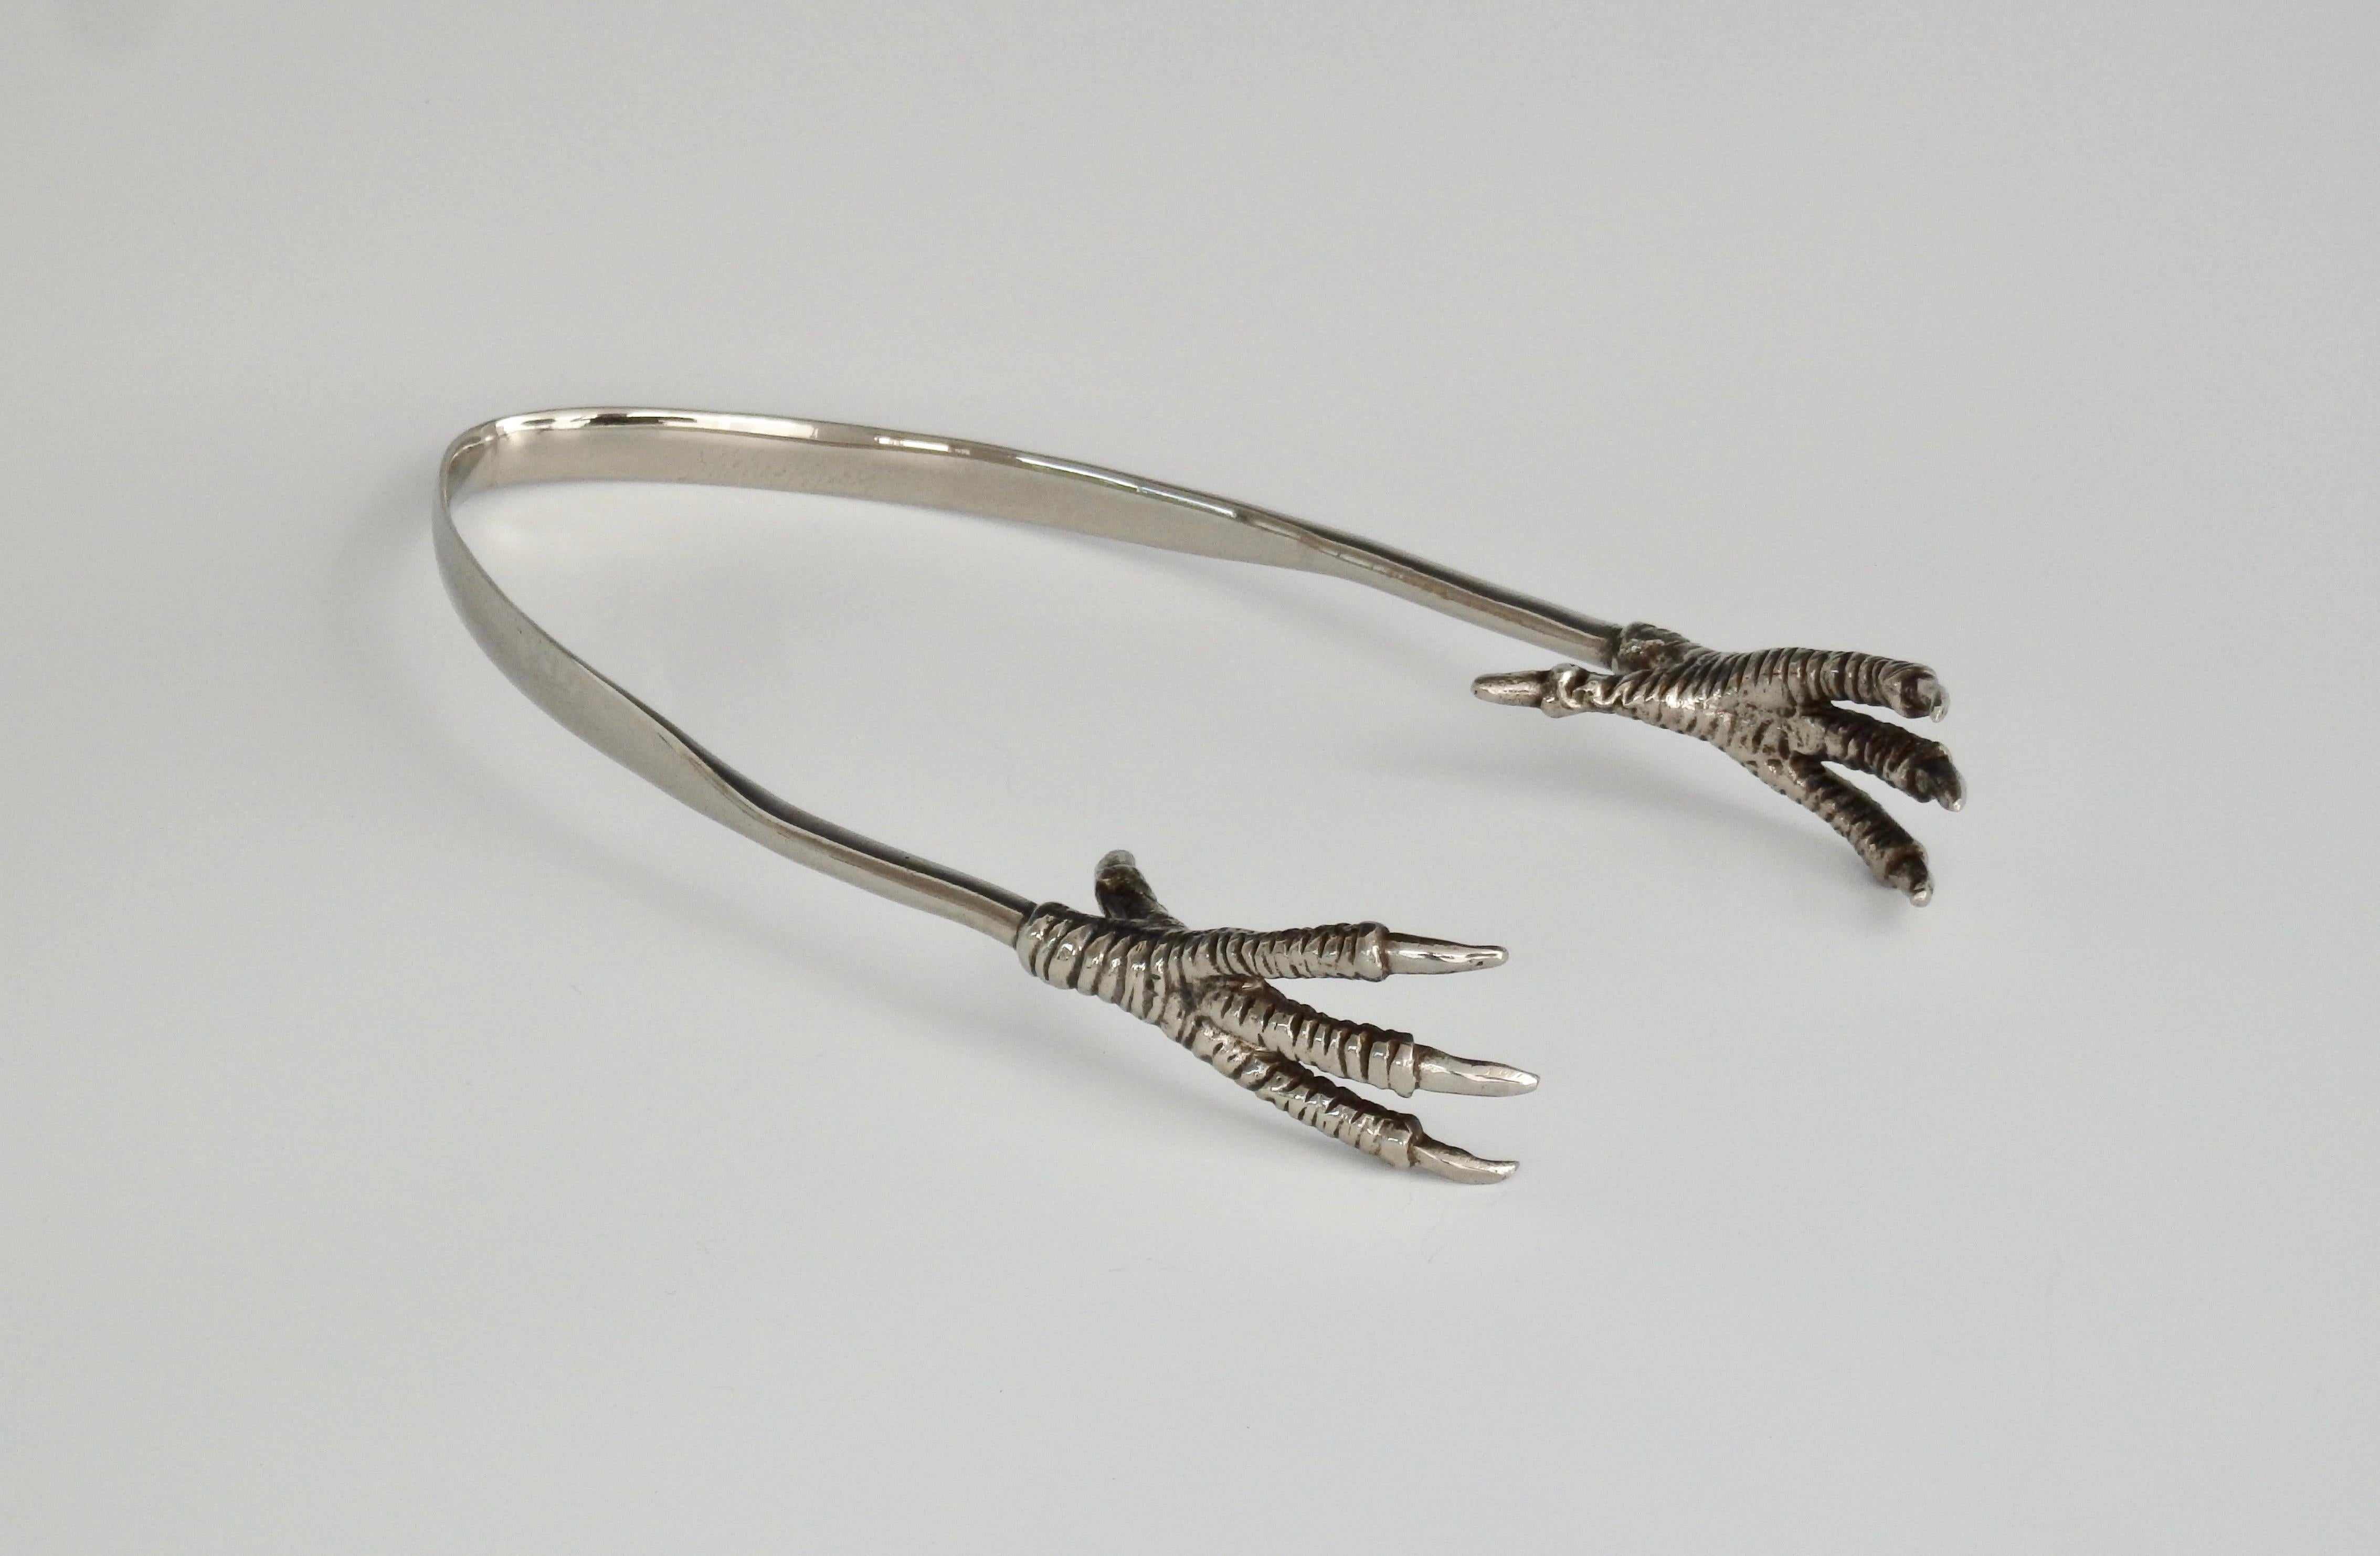 Metalware designer, Michael Aram's eagle talon claw tongs. Perfect as ice tongs for your bar. Signed.